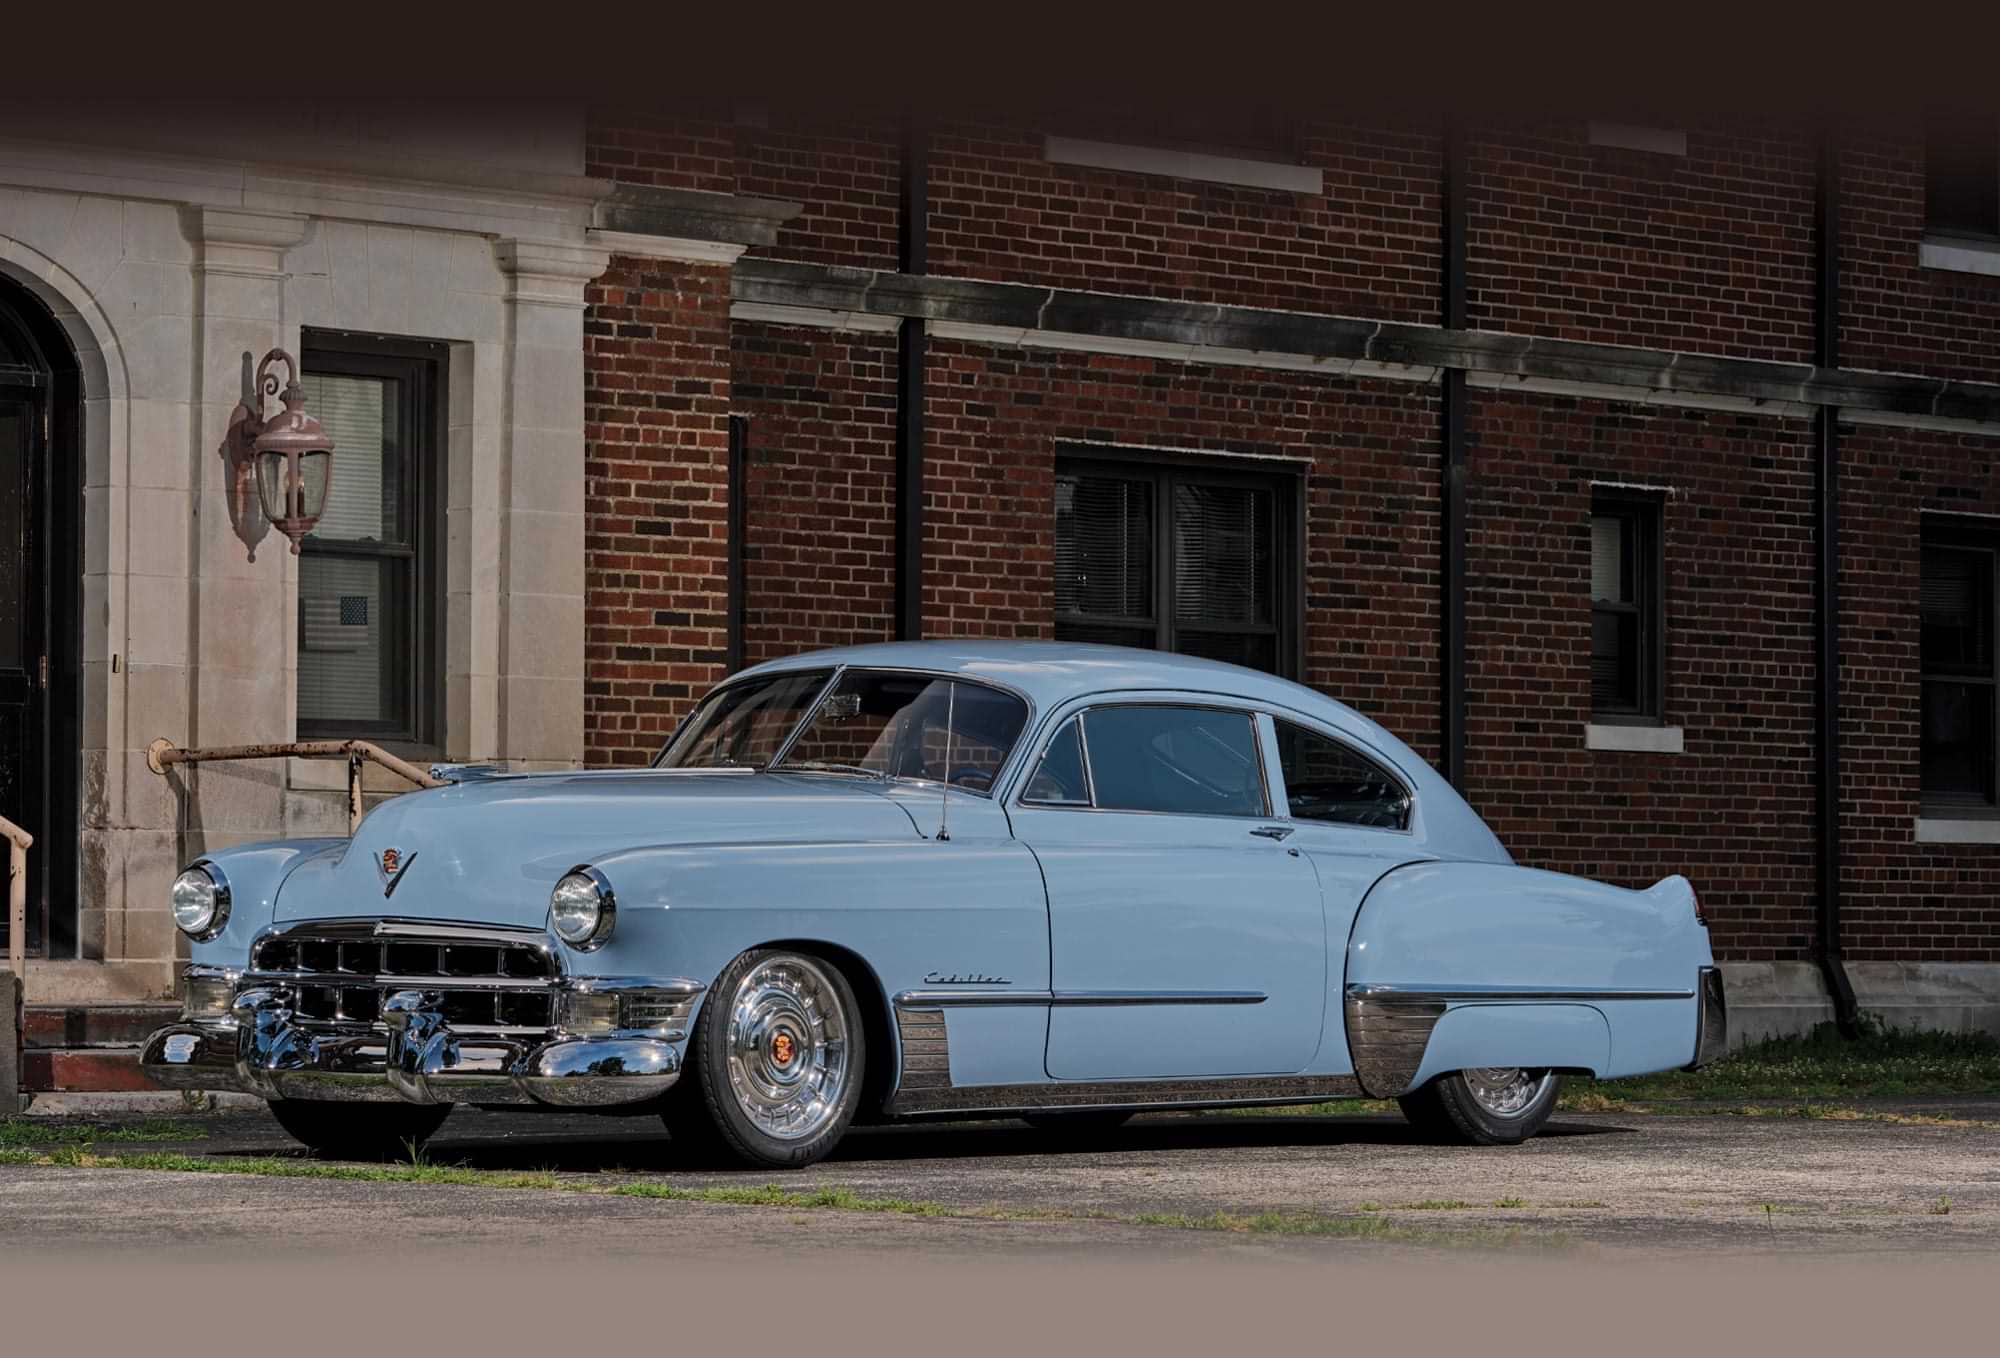 three quarter driver's side front view of the pale blue ’49 Cadillac Series 62 Sedanette parked in front of a red brick building